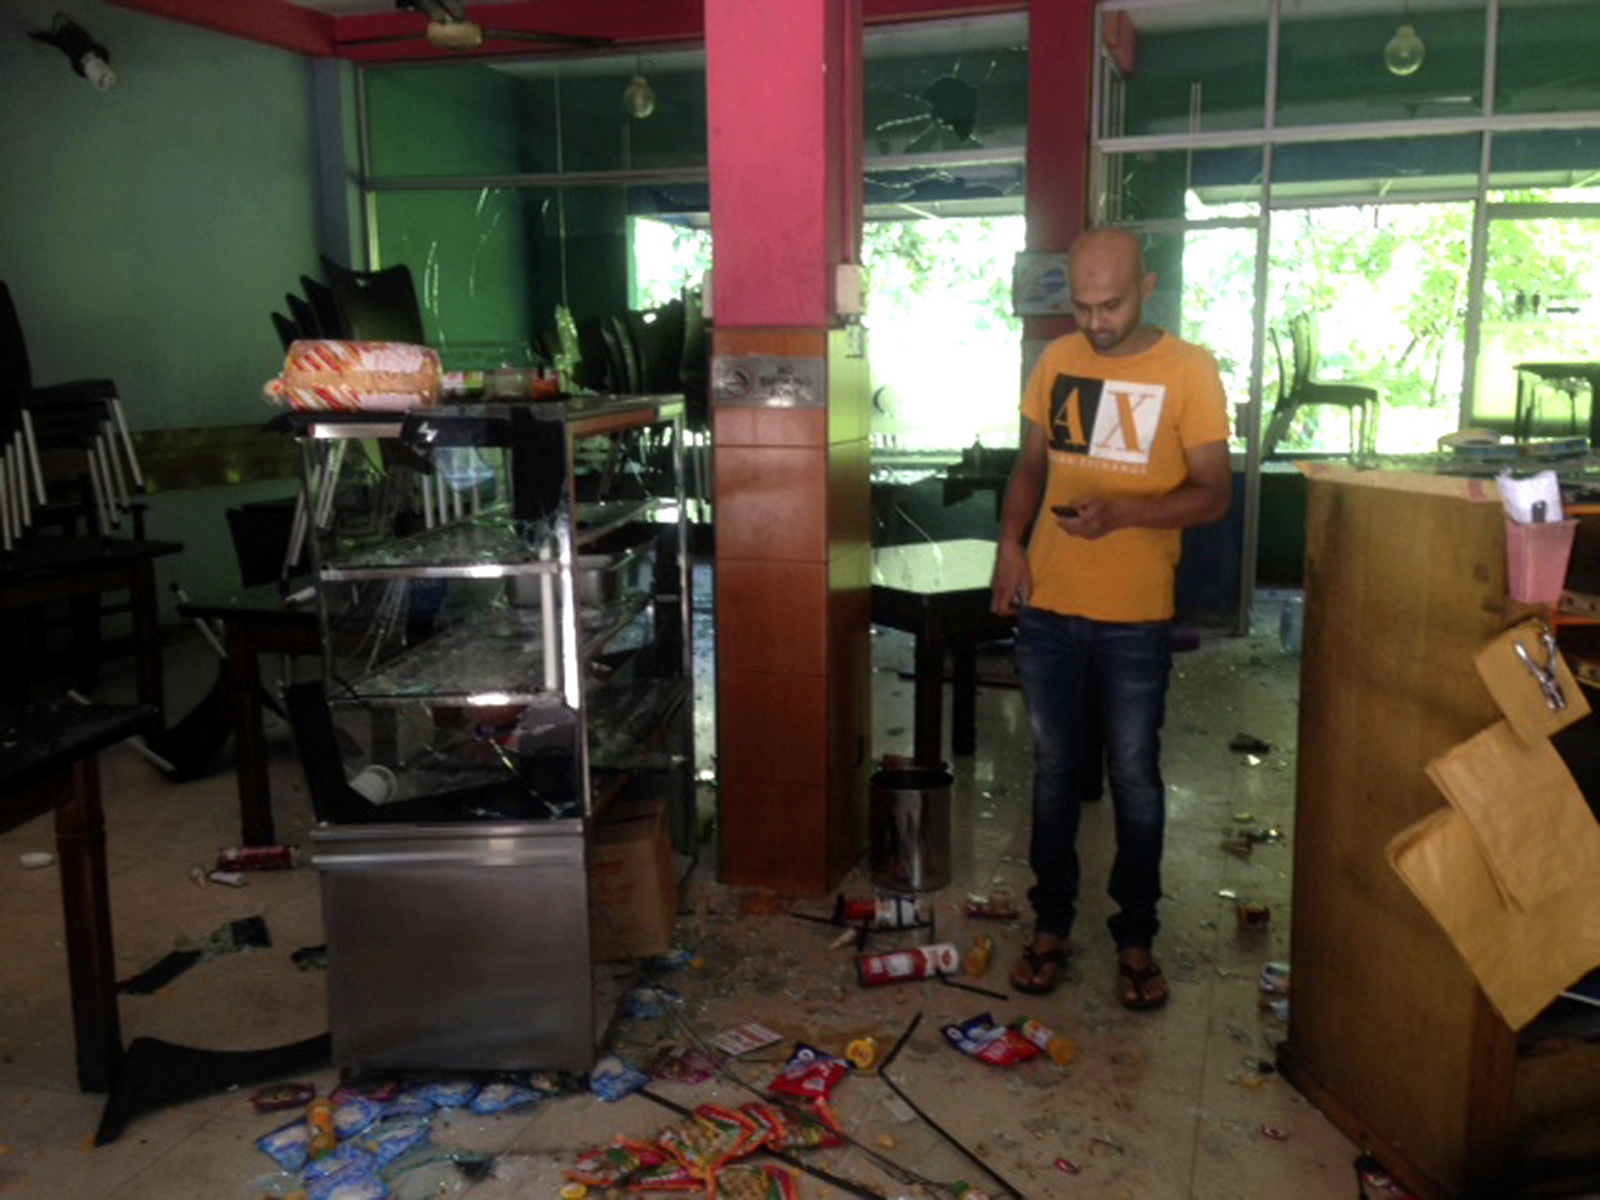 Mohamed Ramzeen makes a call from his mobile phone standing in his vandalized small restaurant in Pilimathalawa, Sri Lanka, March 8, 2018. About 50 people broke into Ramzeen's small restaurant destroying nearly everything they found, he said. Buddhist mobs swept through Muslim neighborhoods in Sri Lanka's central hills, destroying stores and restaurants despite a curfew, a state of emergency and a heavy deployment of security forces. (AP/Bharatha Mallawarachchi)